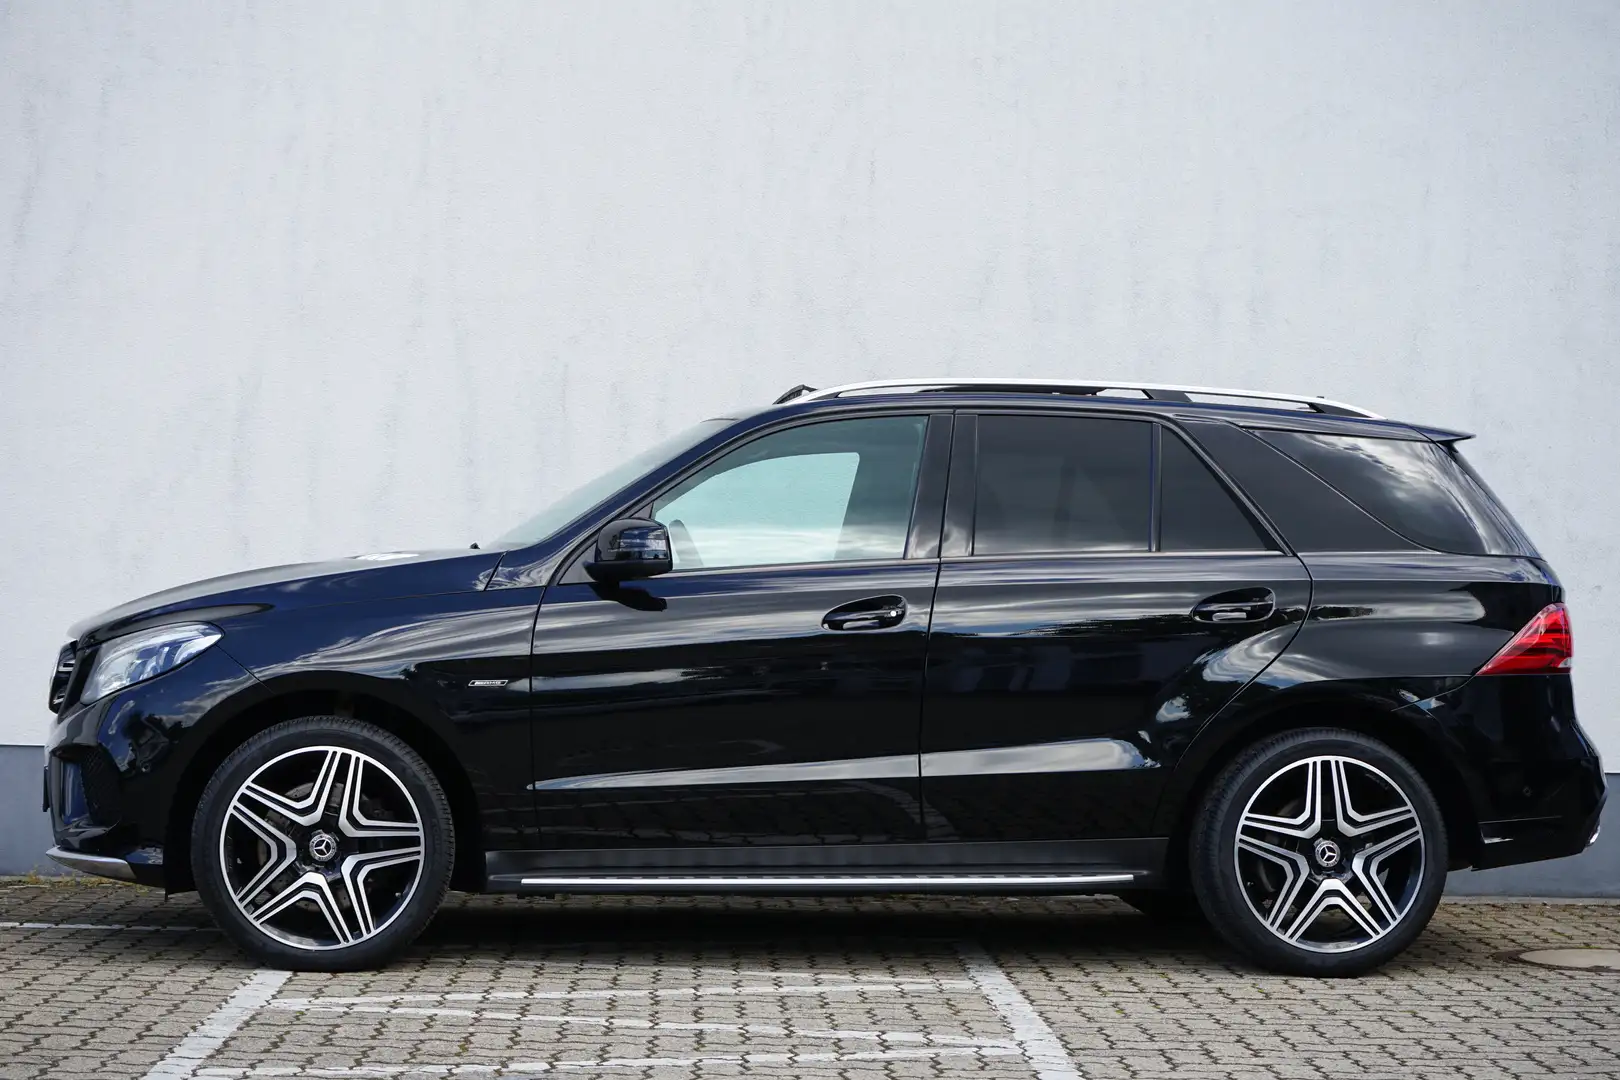 Mercedes-Benz GLE 450 4MATIC*21 Zoll*Panorama*LED ILS*Standheizung*Voll Чорний - 2